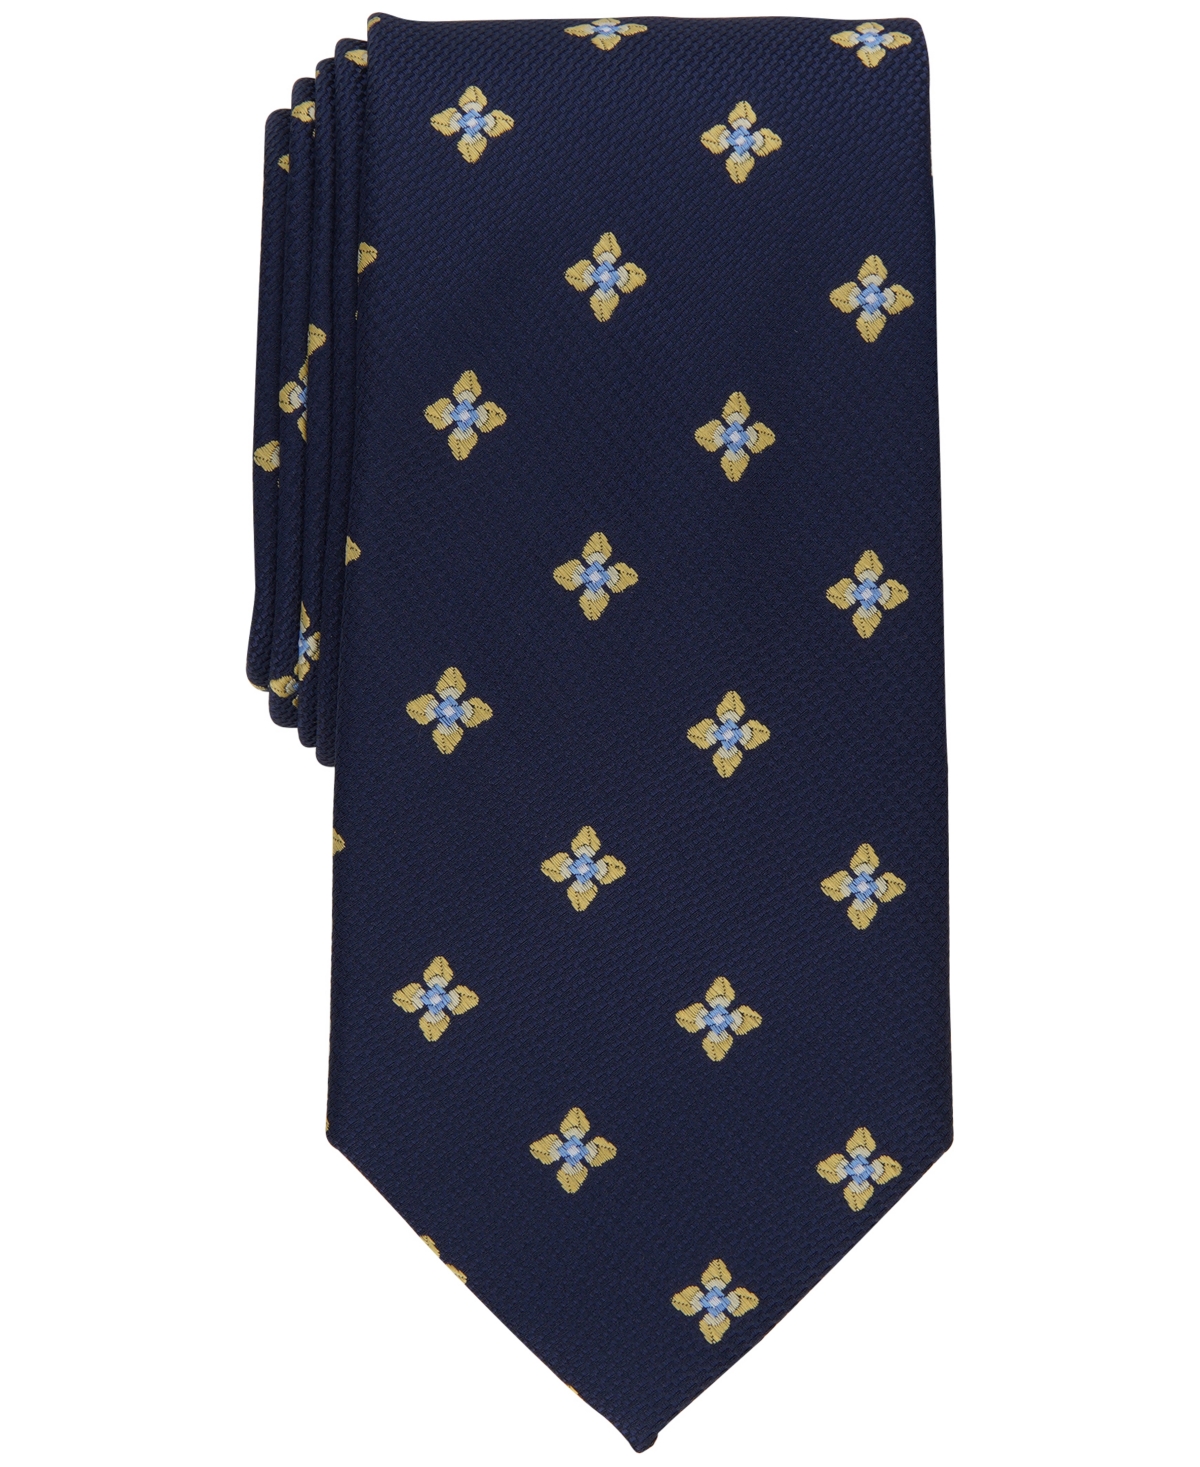 Men's Pearl Neat Tie, Created for Macy's - Yellow